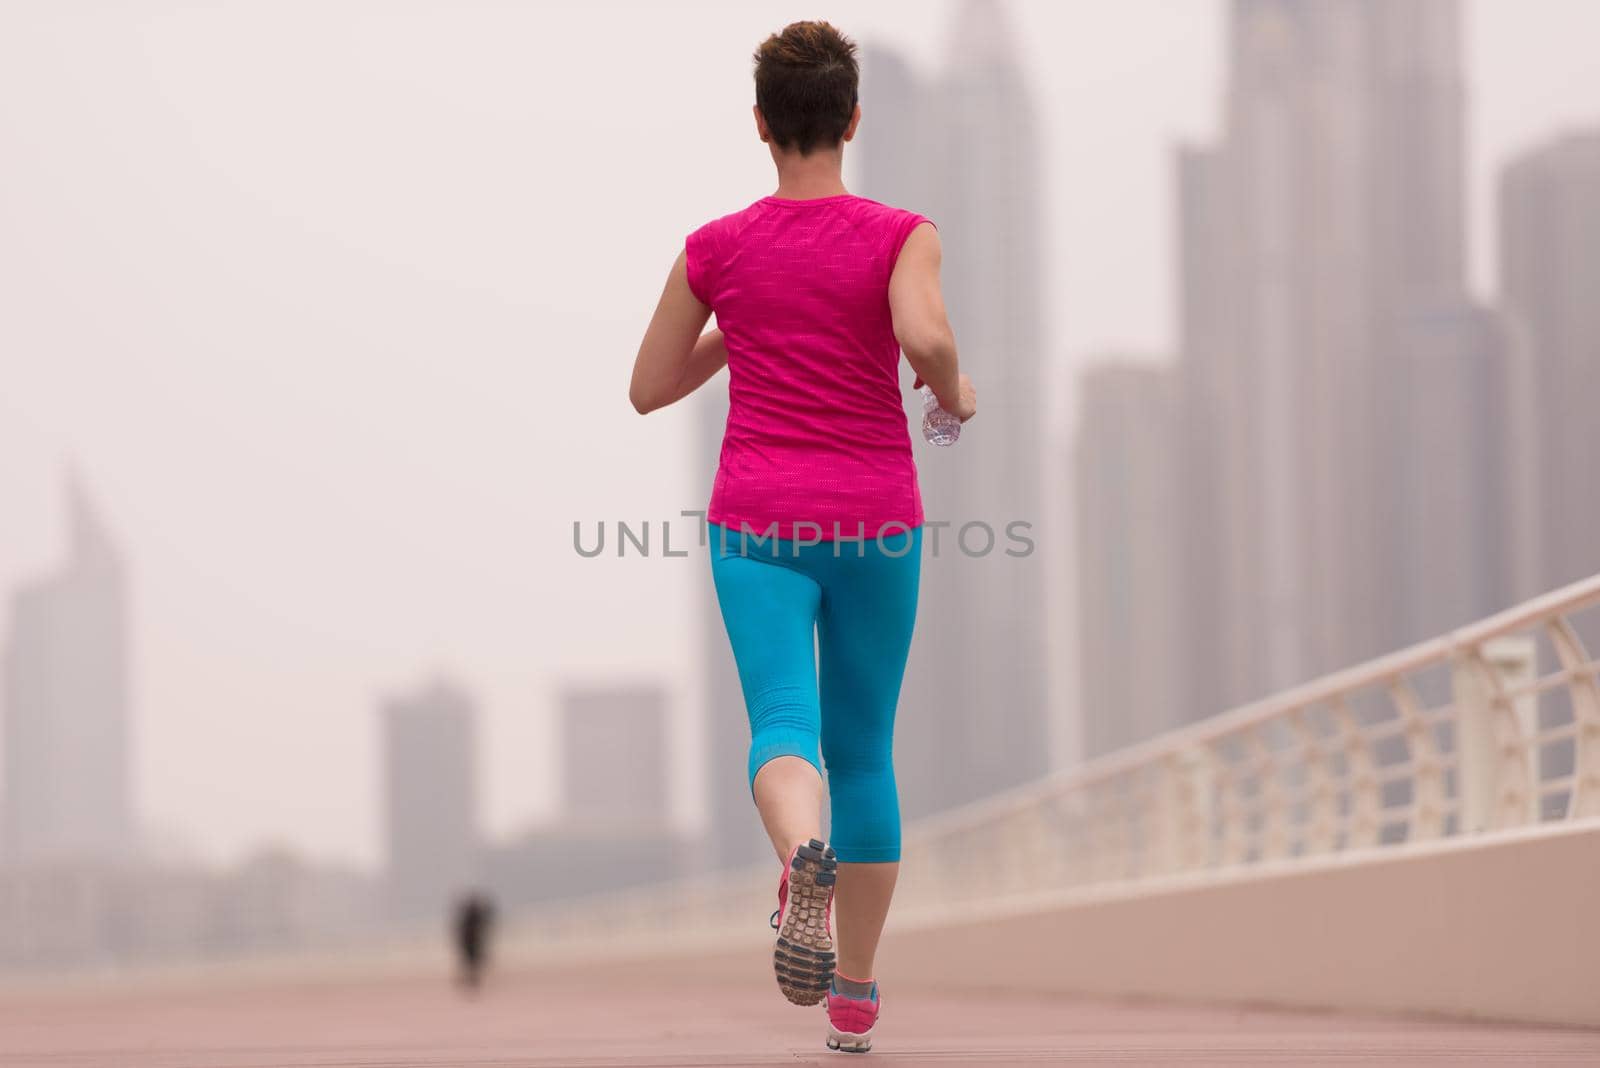 very active young beautiful woman busy running on the promenade along the ocean side with a big modern city in the background to keep up her fitness levels as much as possible